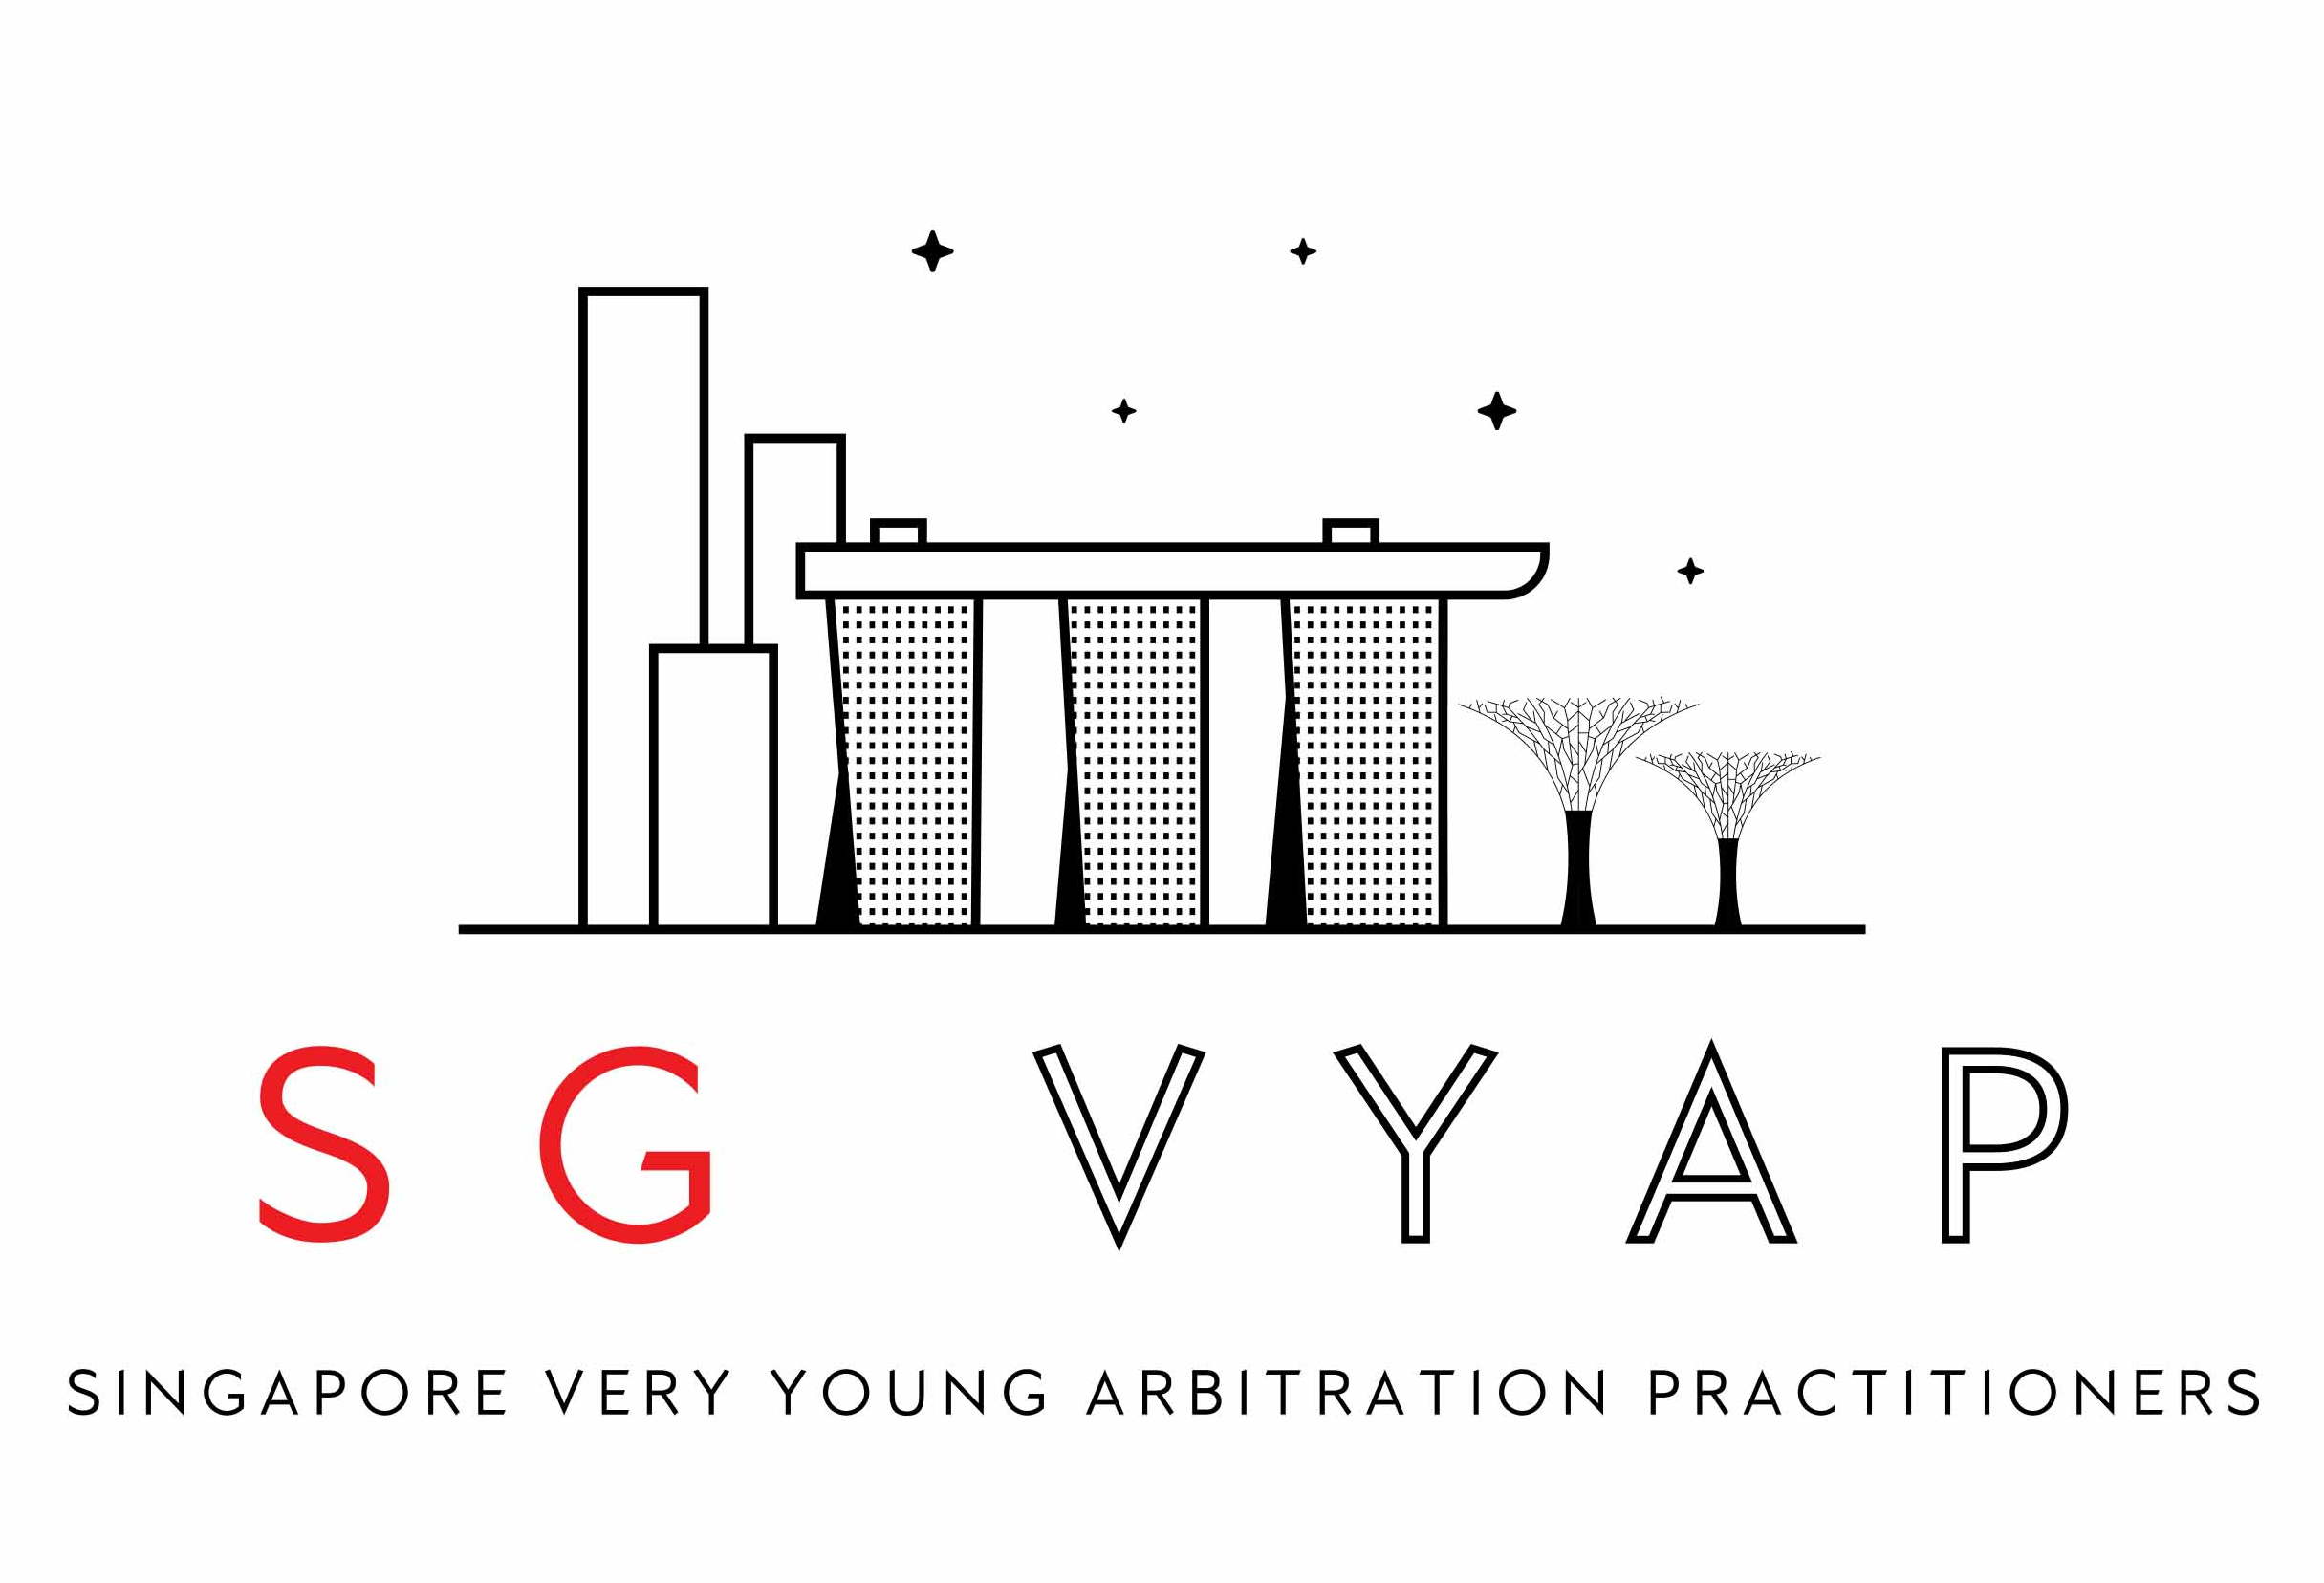 SG VYAP (Singapore Very Young Arbitration Practitioners)